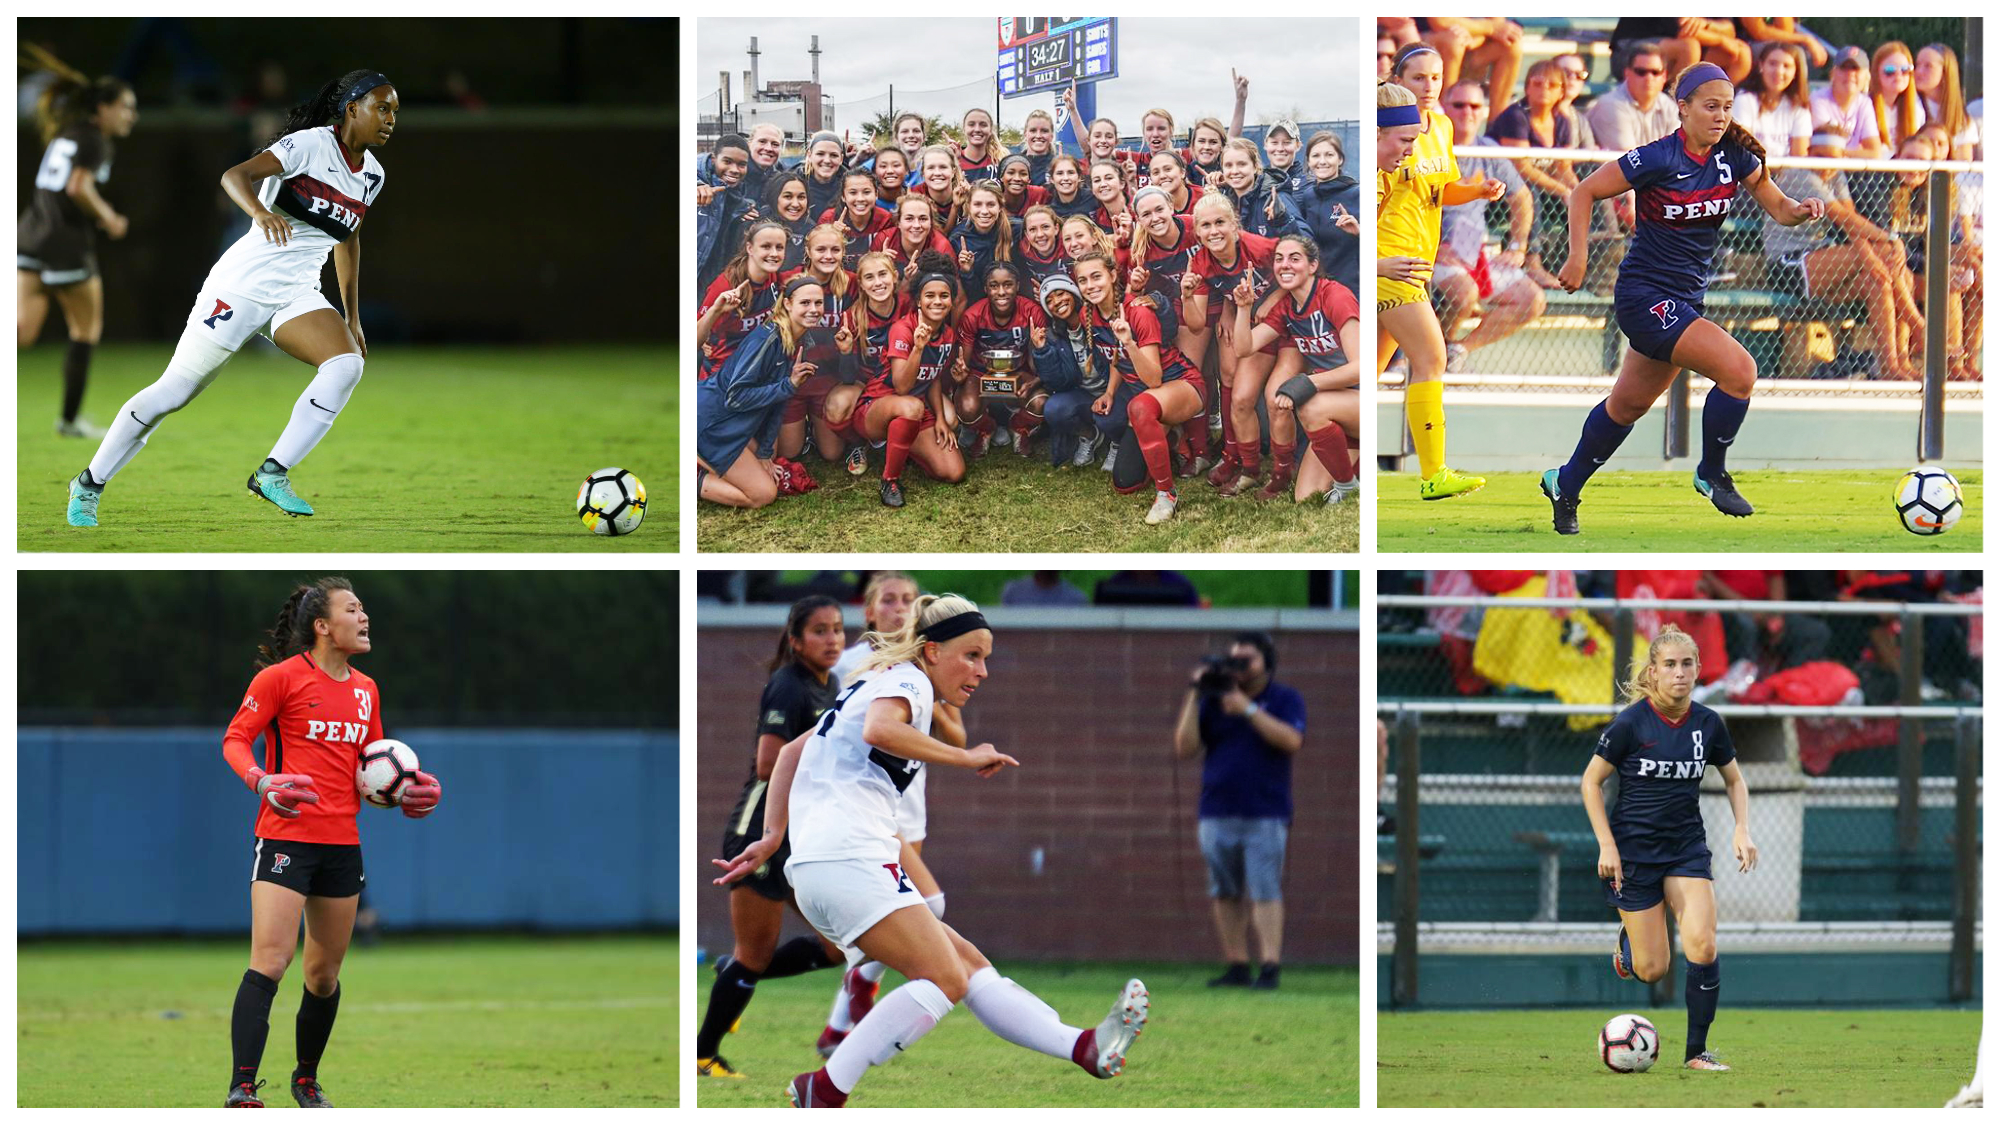 A grid showing members of the 2018 women's soccer team kicking the ball, holding the ball, running toward the ball, and celebrating their Ivy League co-championship.